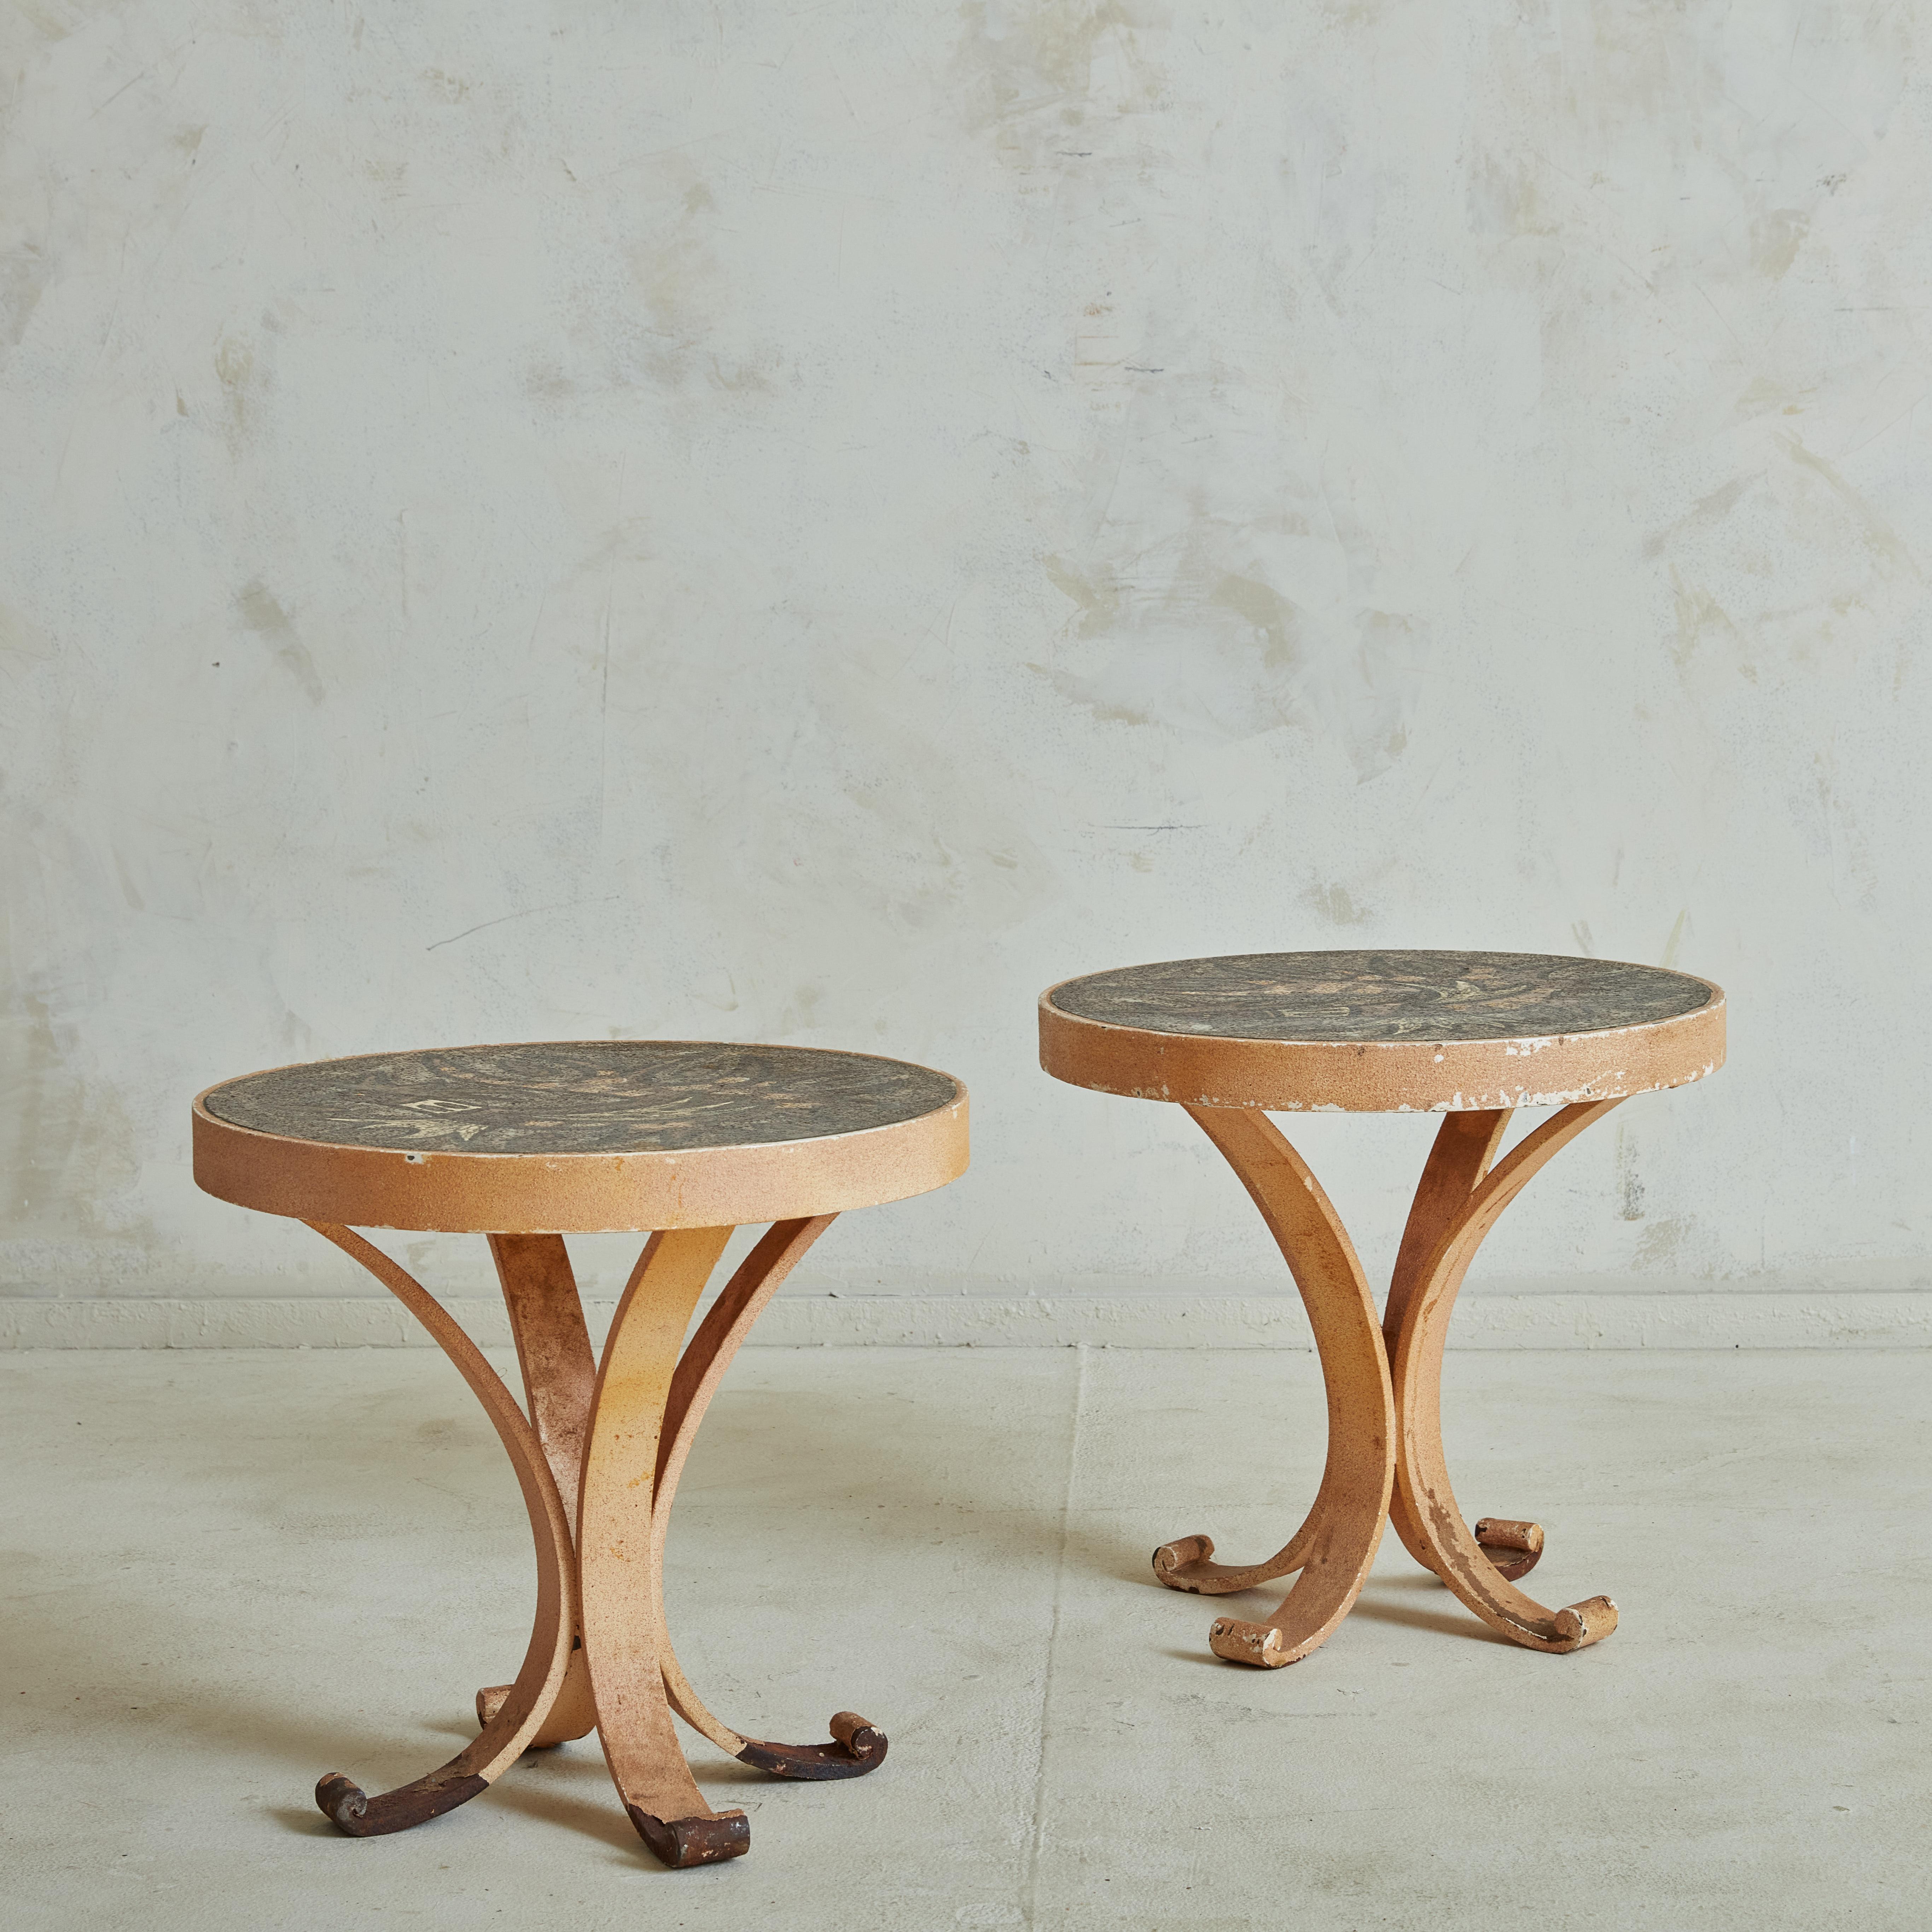 Pair of side or coffee tables in enameled lavic stone in the style of Jean Jaffeux with whimsical decorations in shades of brown and beige. The table top is sitting on a wrought iron white lacquered base with organic shapes, recalling Art Deco